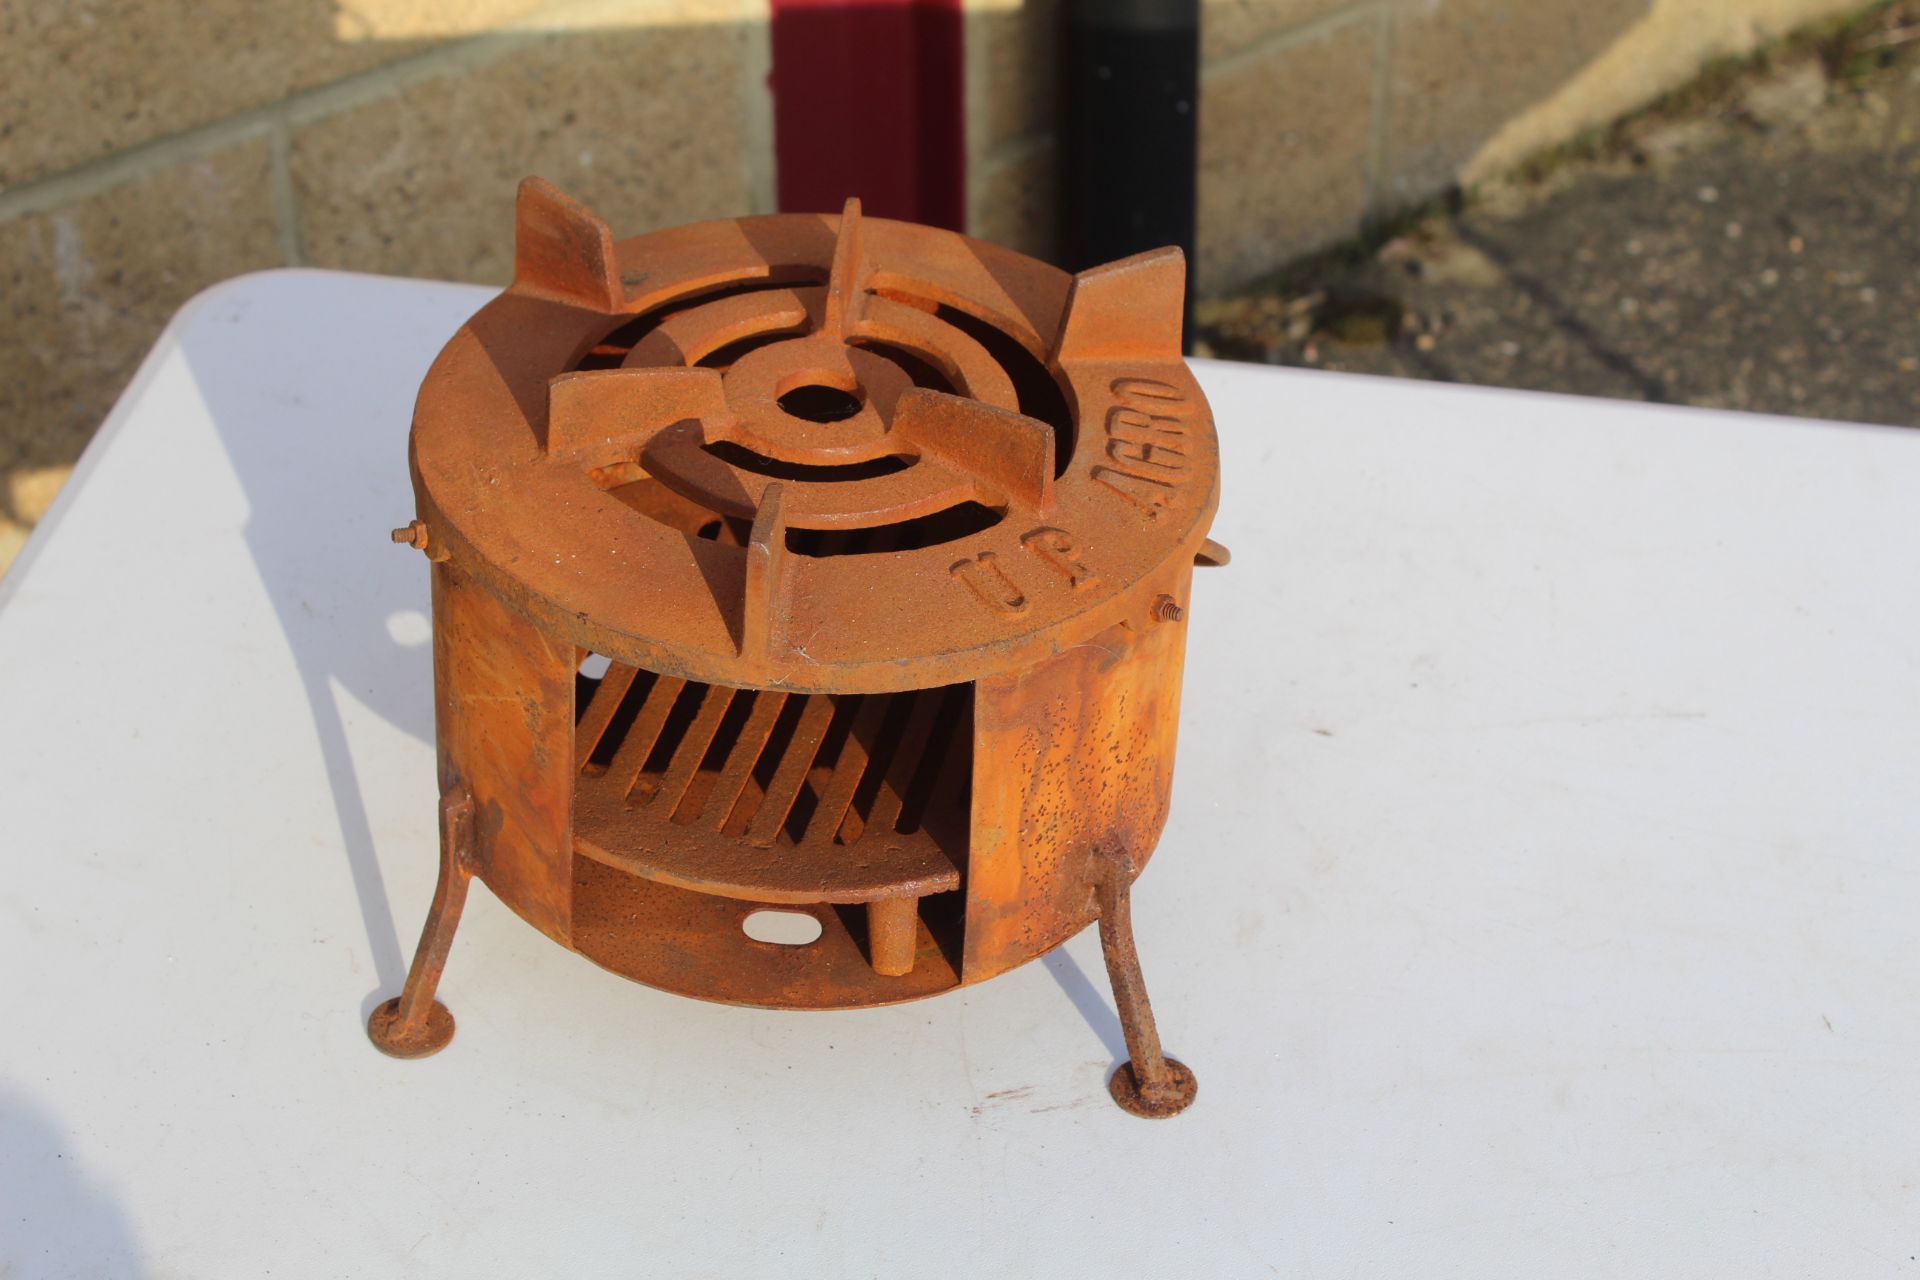 Charcoal cooking stove. V